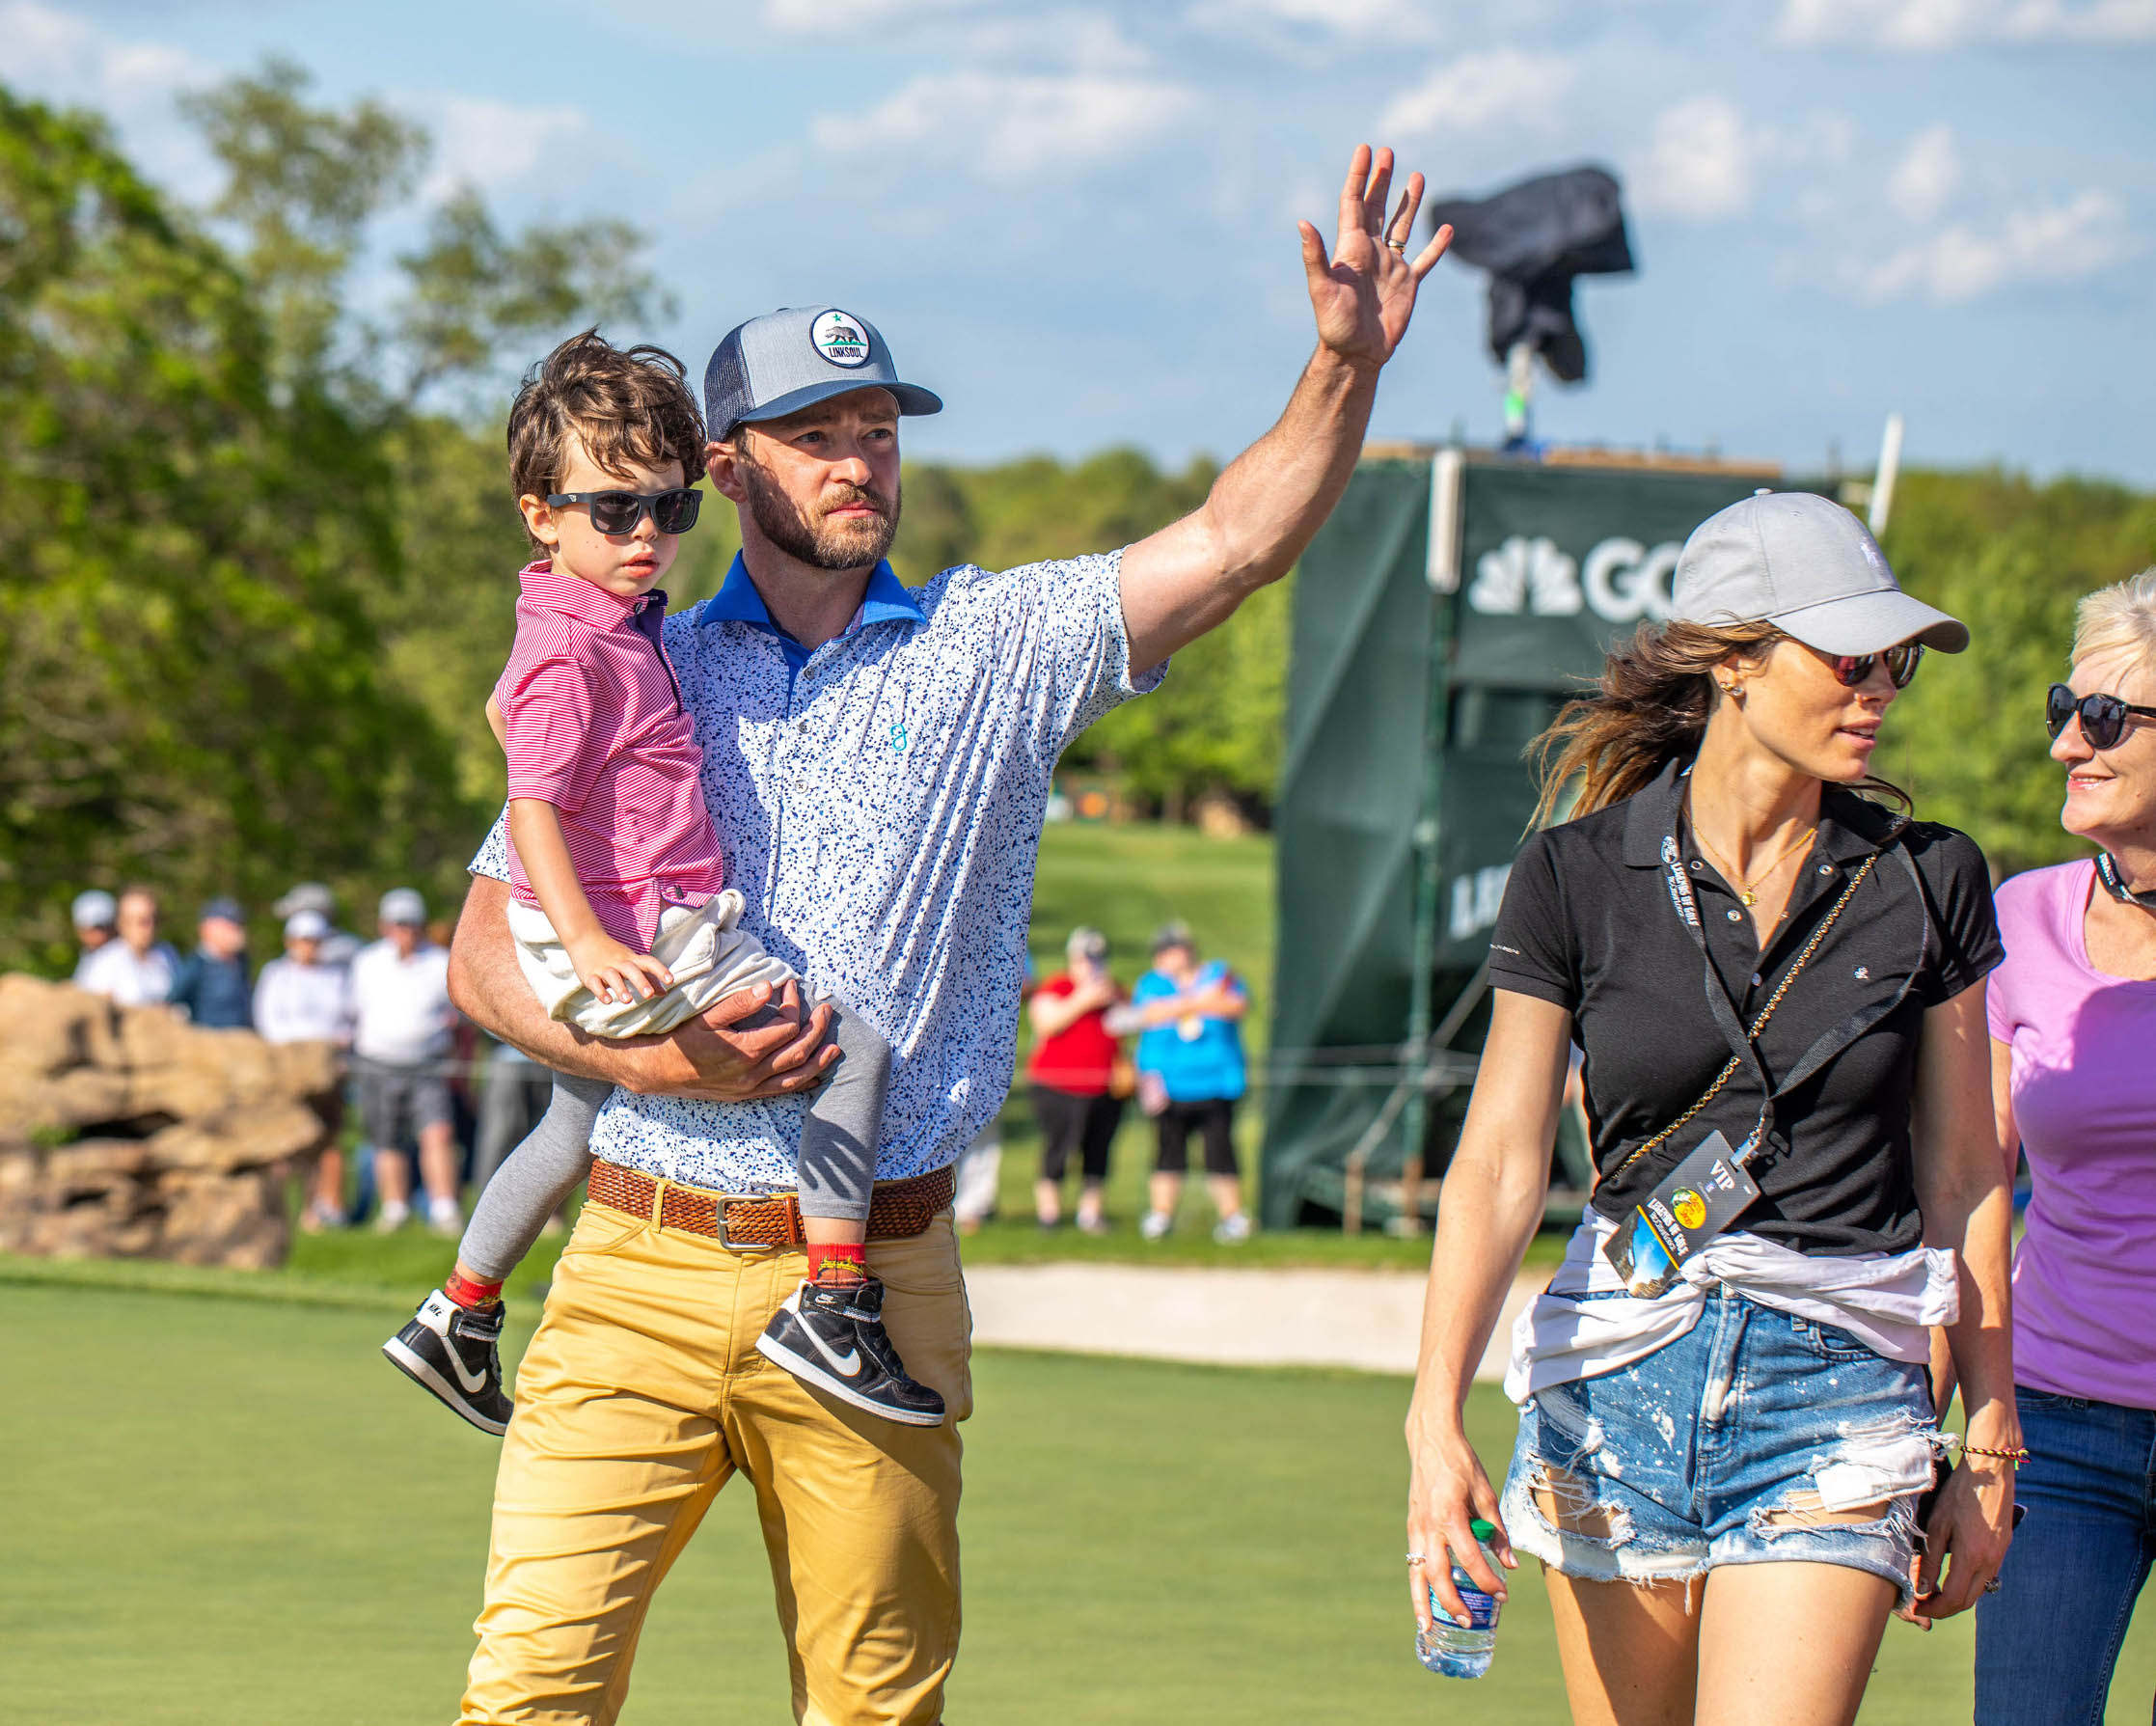 - Ridgedale, MO - 04/27/2019 - Bass Pro Shops Legends of Golf at Big Cedar Lodge

-PICTURED: Justin Timberlake, Jessica Biel with son Silas
-, Image: 430697629, License: Rights-managed, Restrictions: , Model Release: no, Credit line: MICHAEL SIMON / INSTAR Images / Profimedia